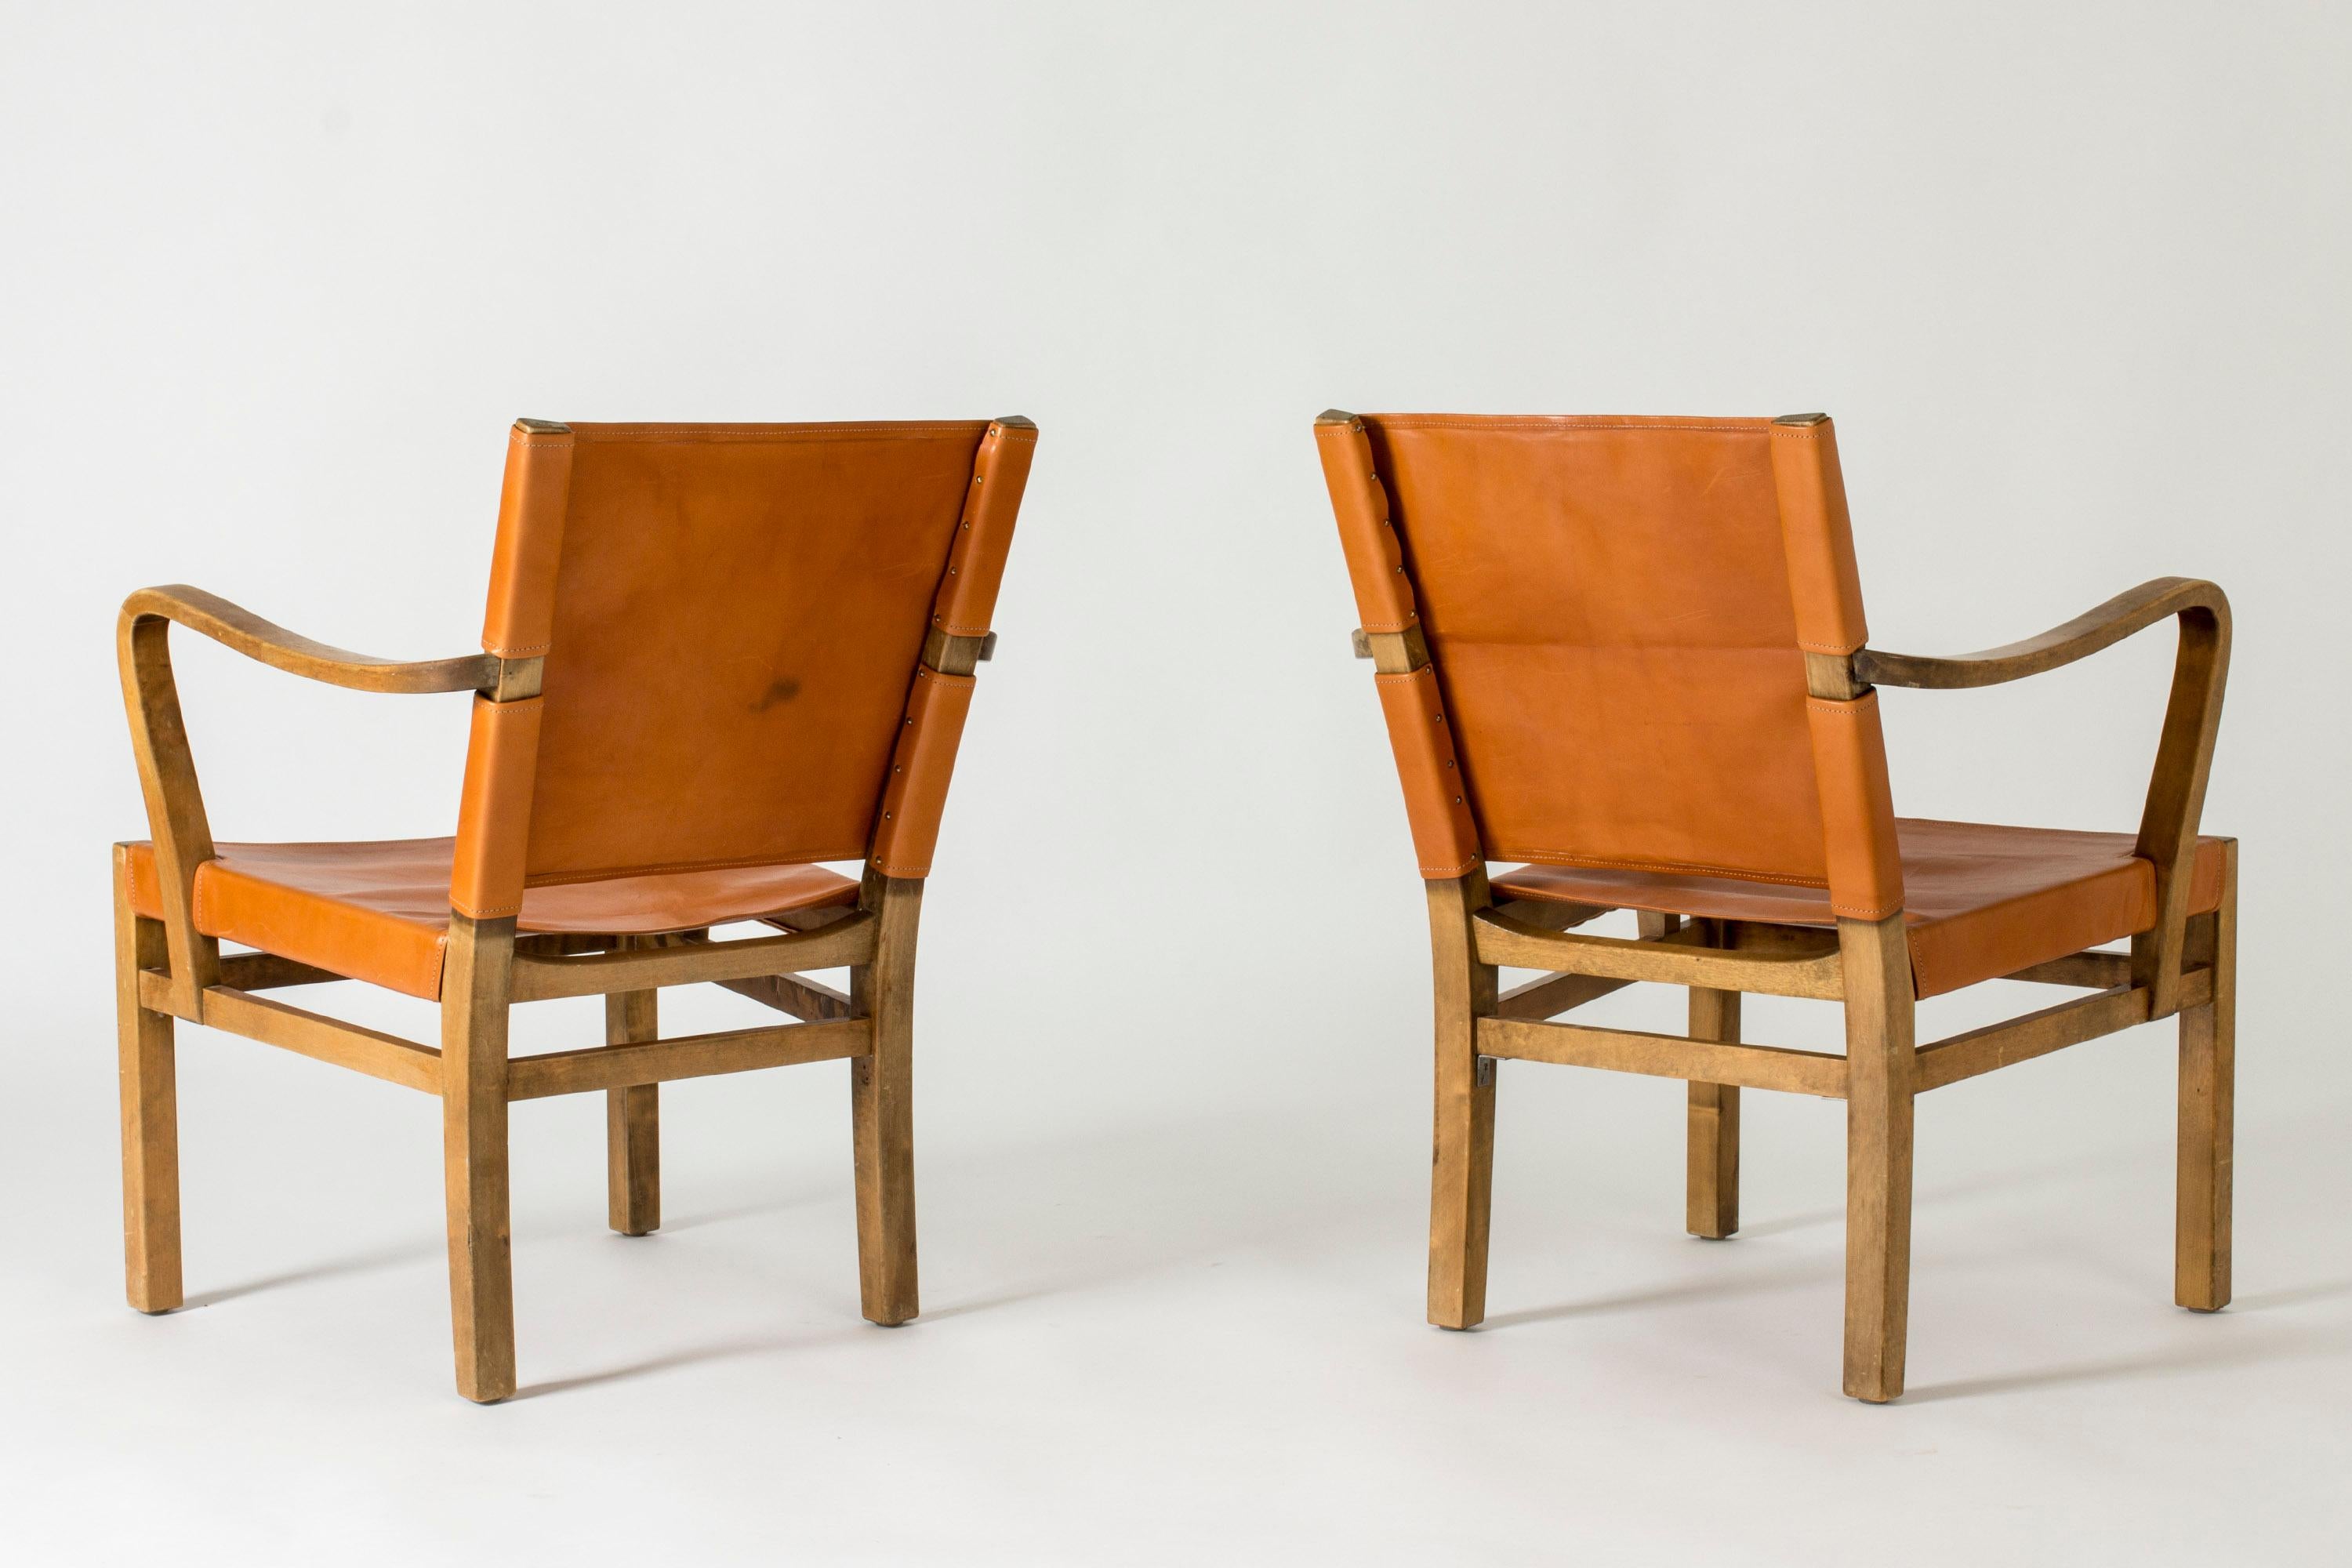 Mid-20th Century Scandinavian Modern Armchairs by Elias Svedberg, Sweden, 1930s For Sale